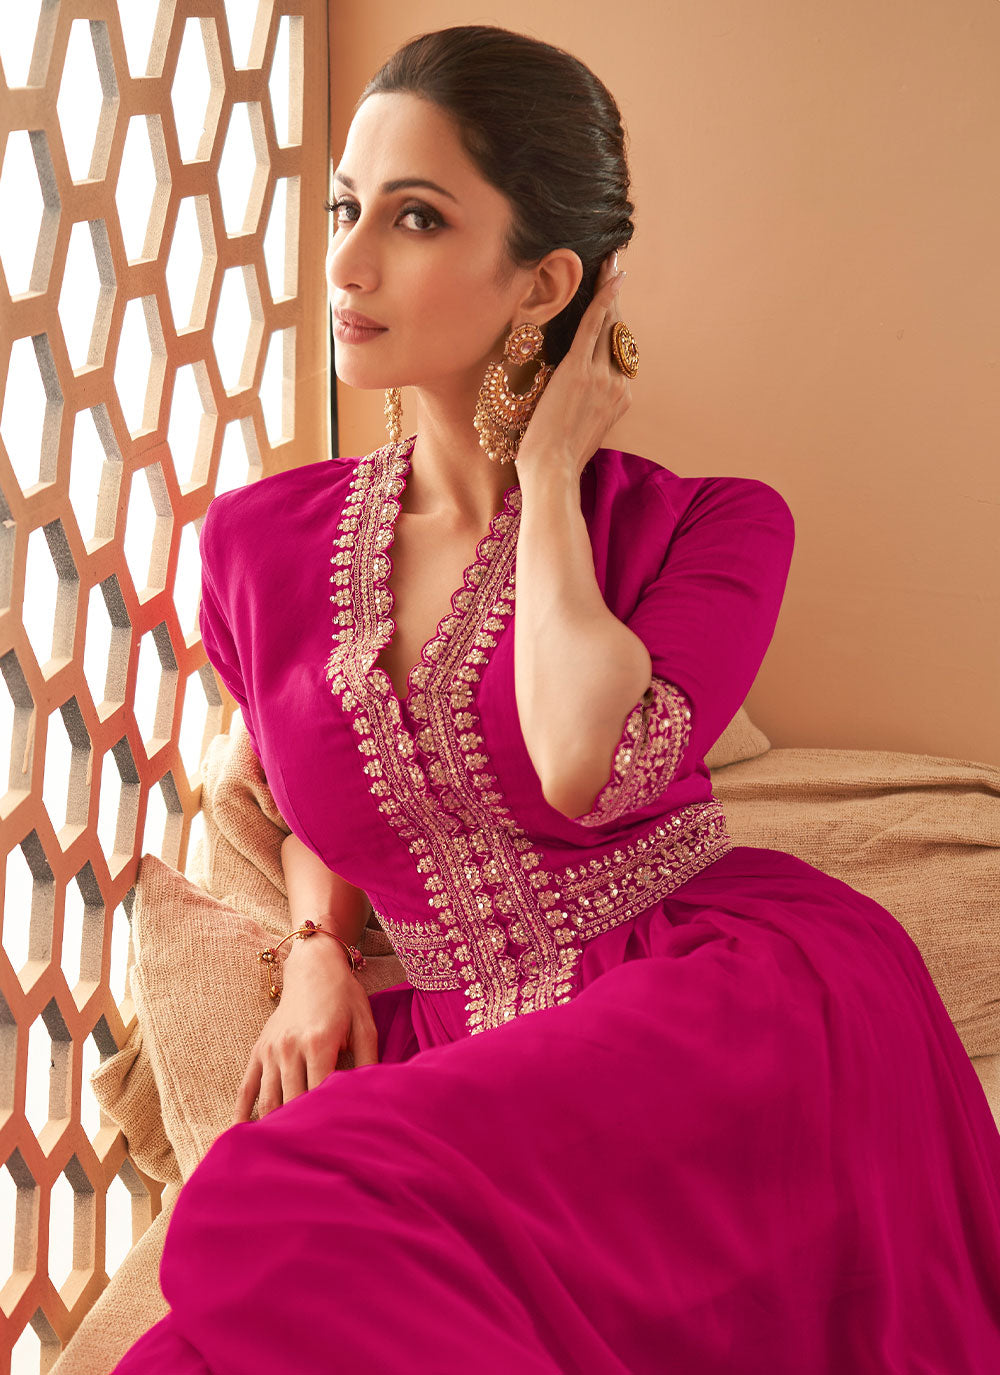 Readymade Trendy Gown In Hot Pink